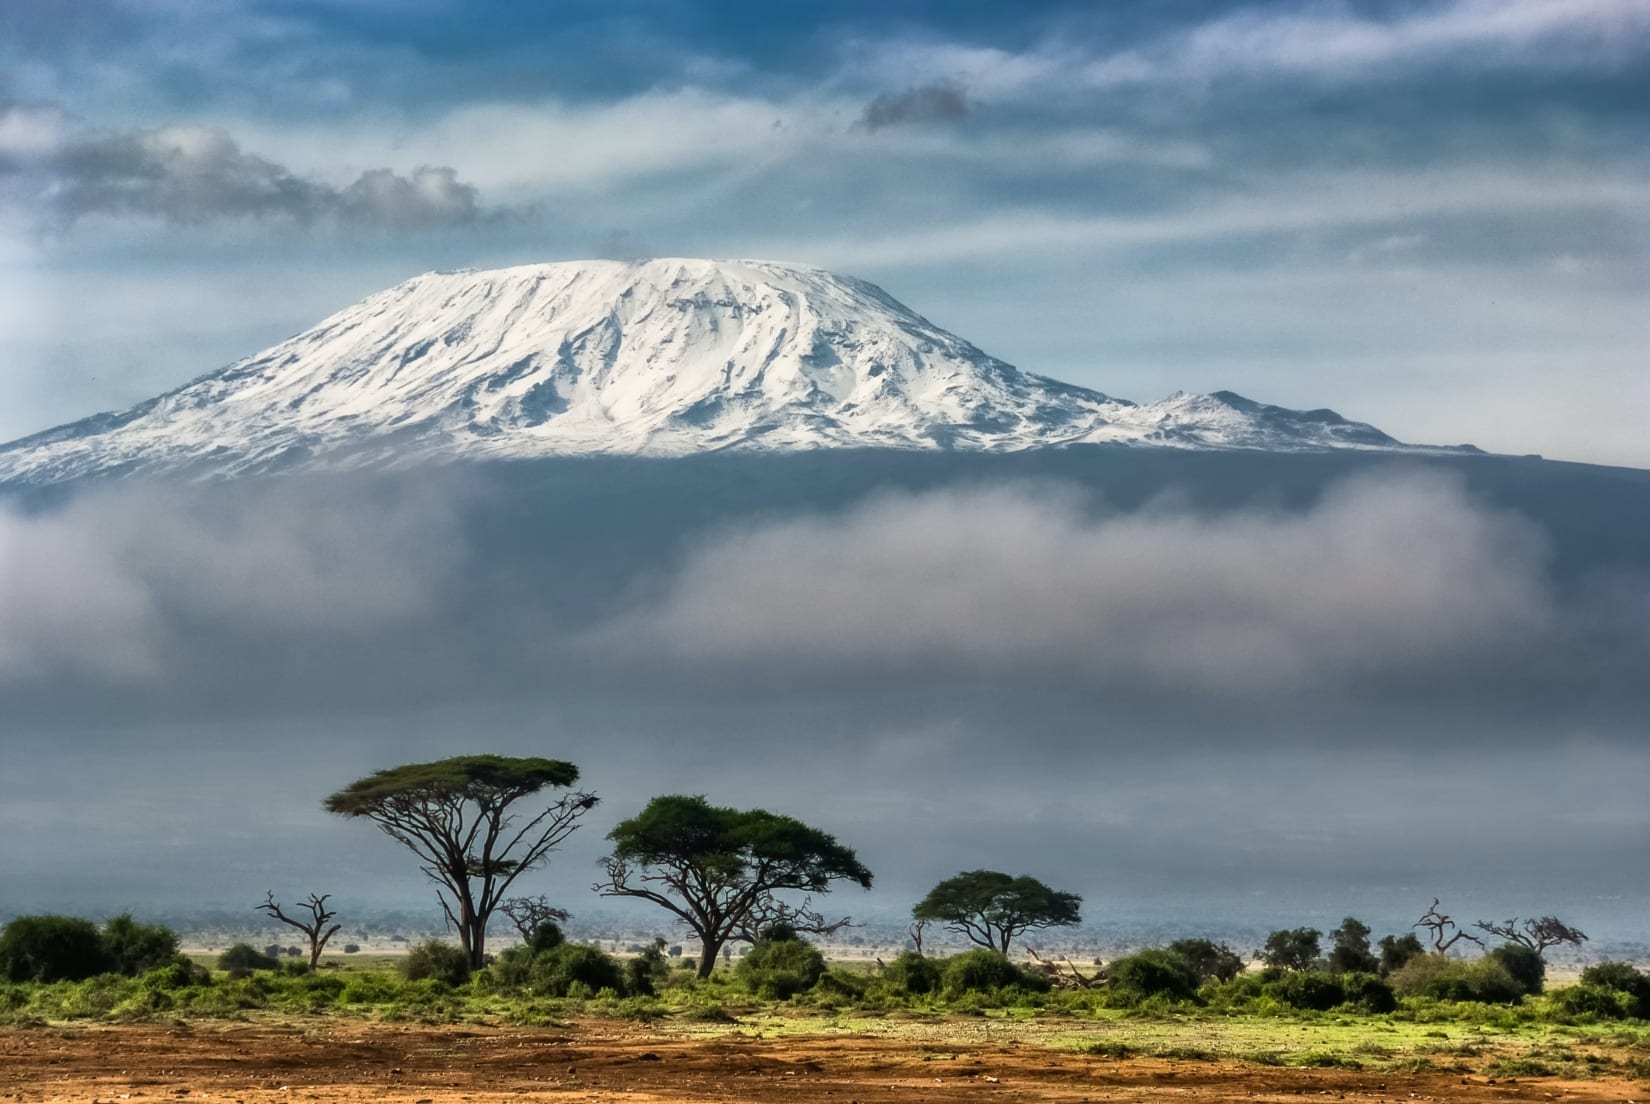 nuance patois Rose Climb Mount Kilimanjaro - What You Want to Know